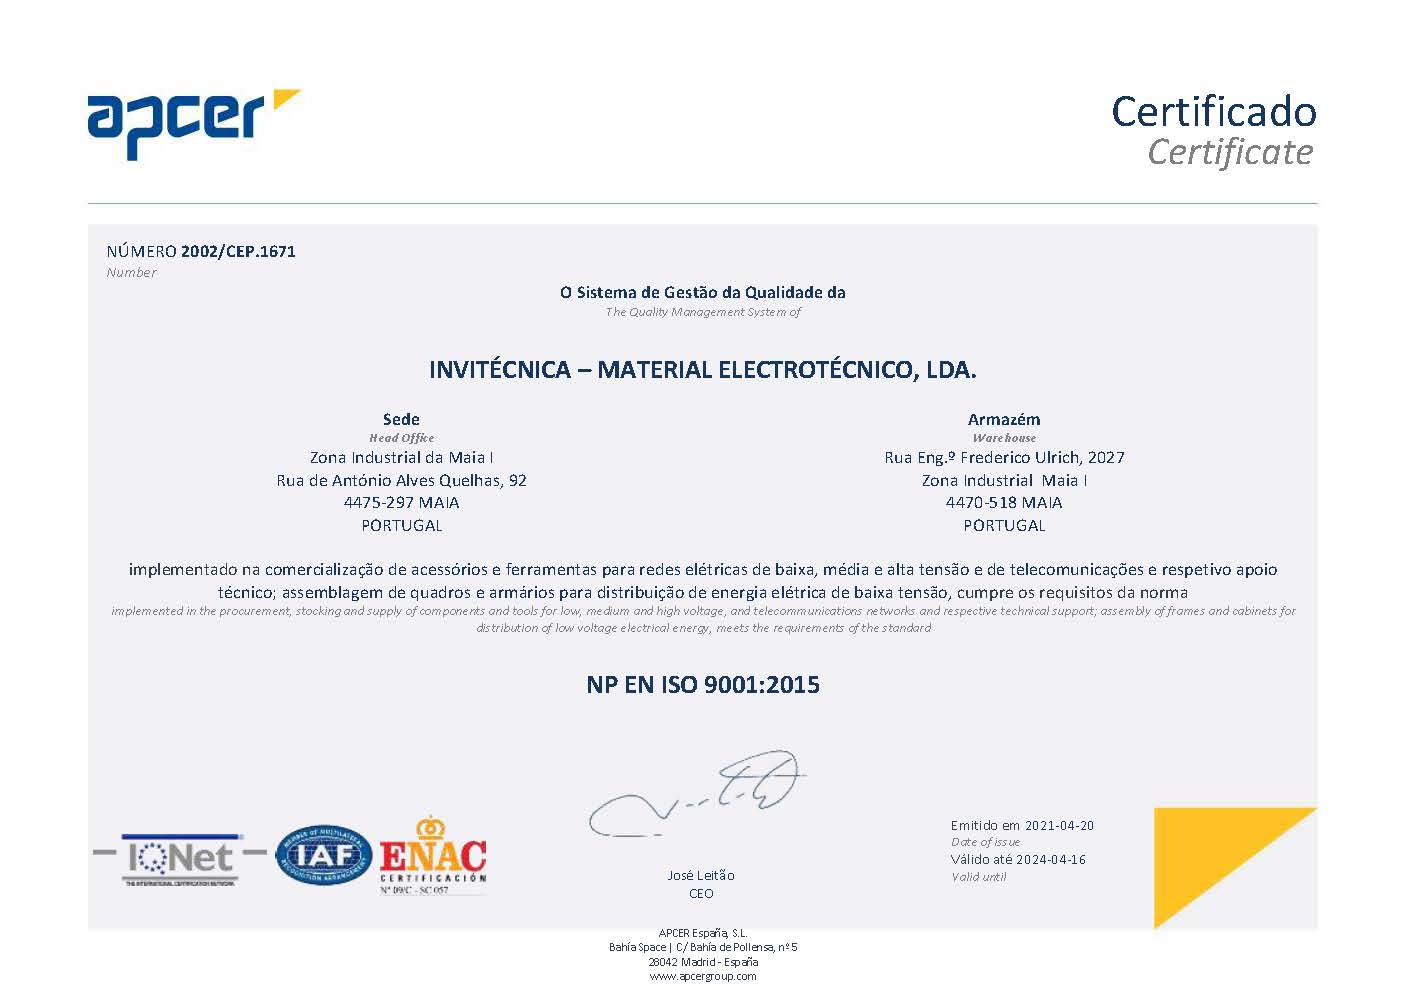 CERTIFICATE OF QUALITY MANAGEMENT SYSTEM - APCER - ISO 9001-2015